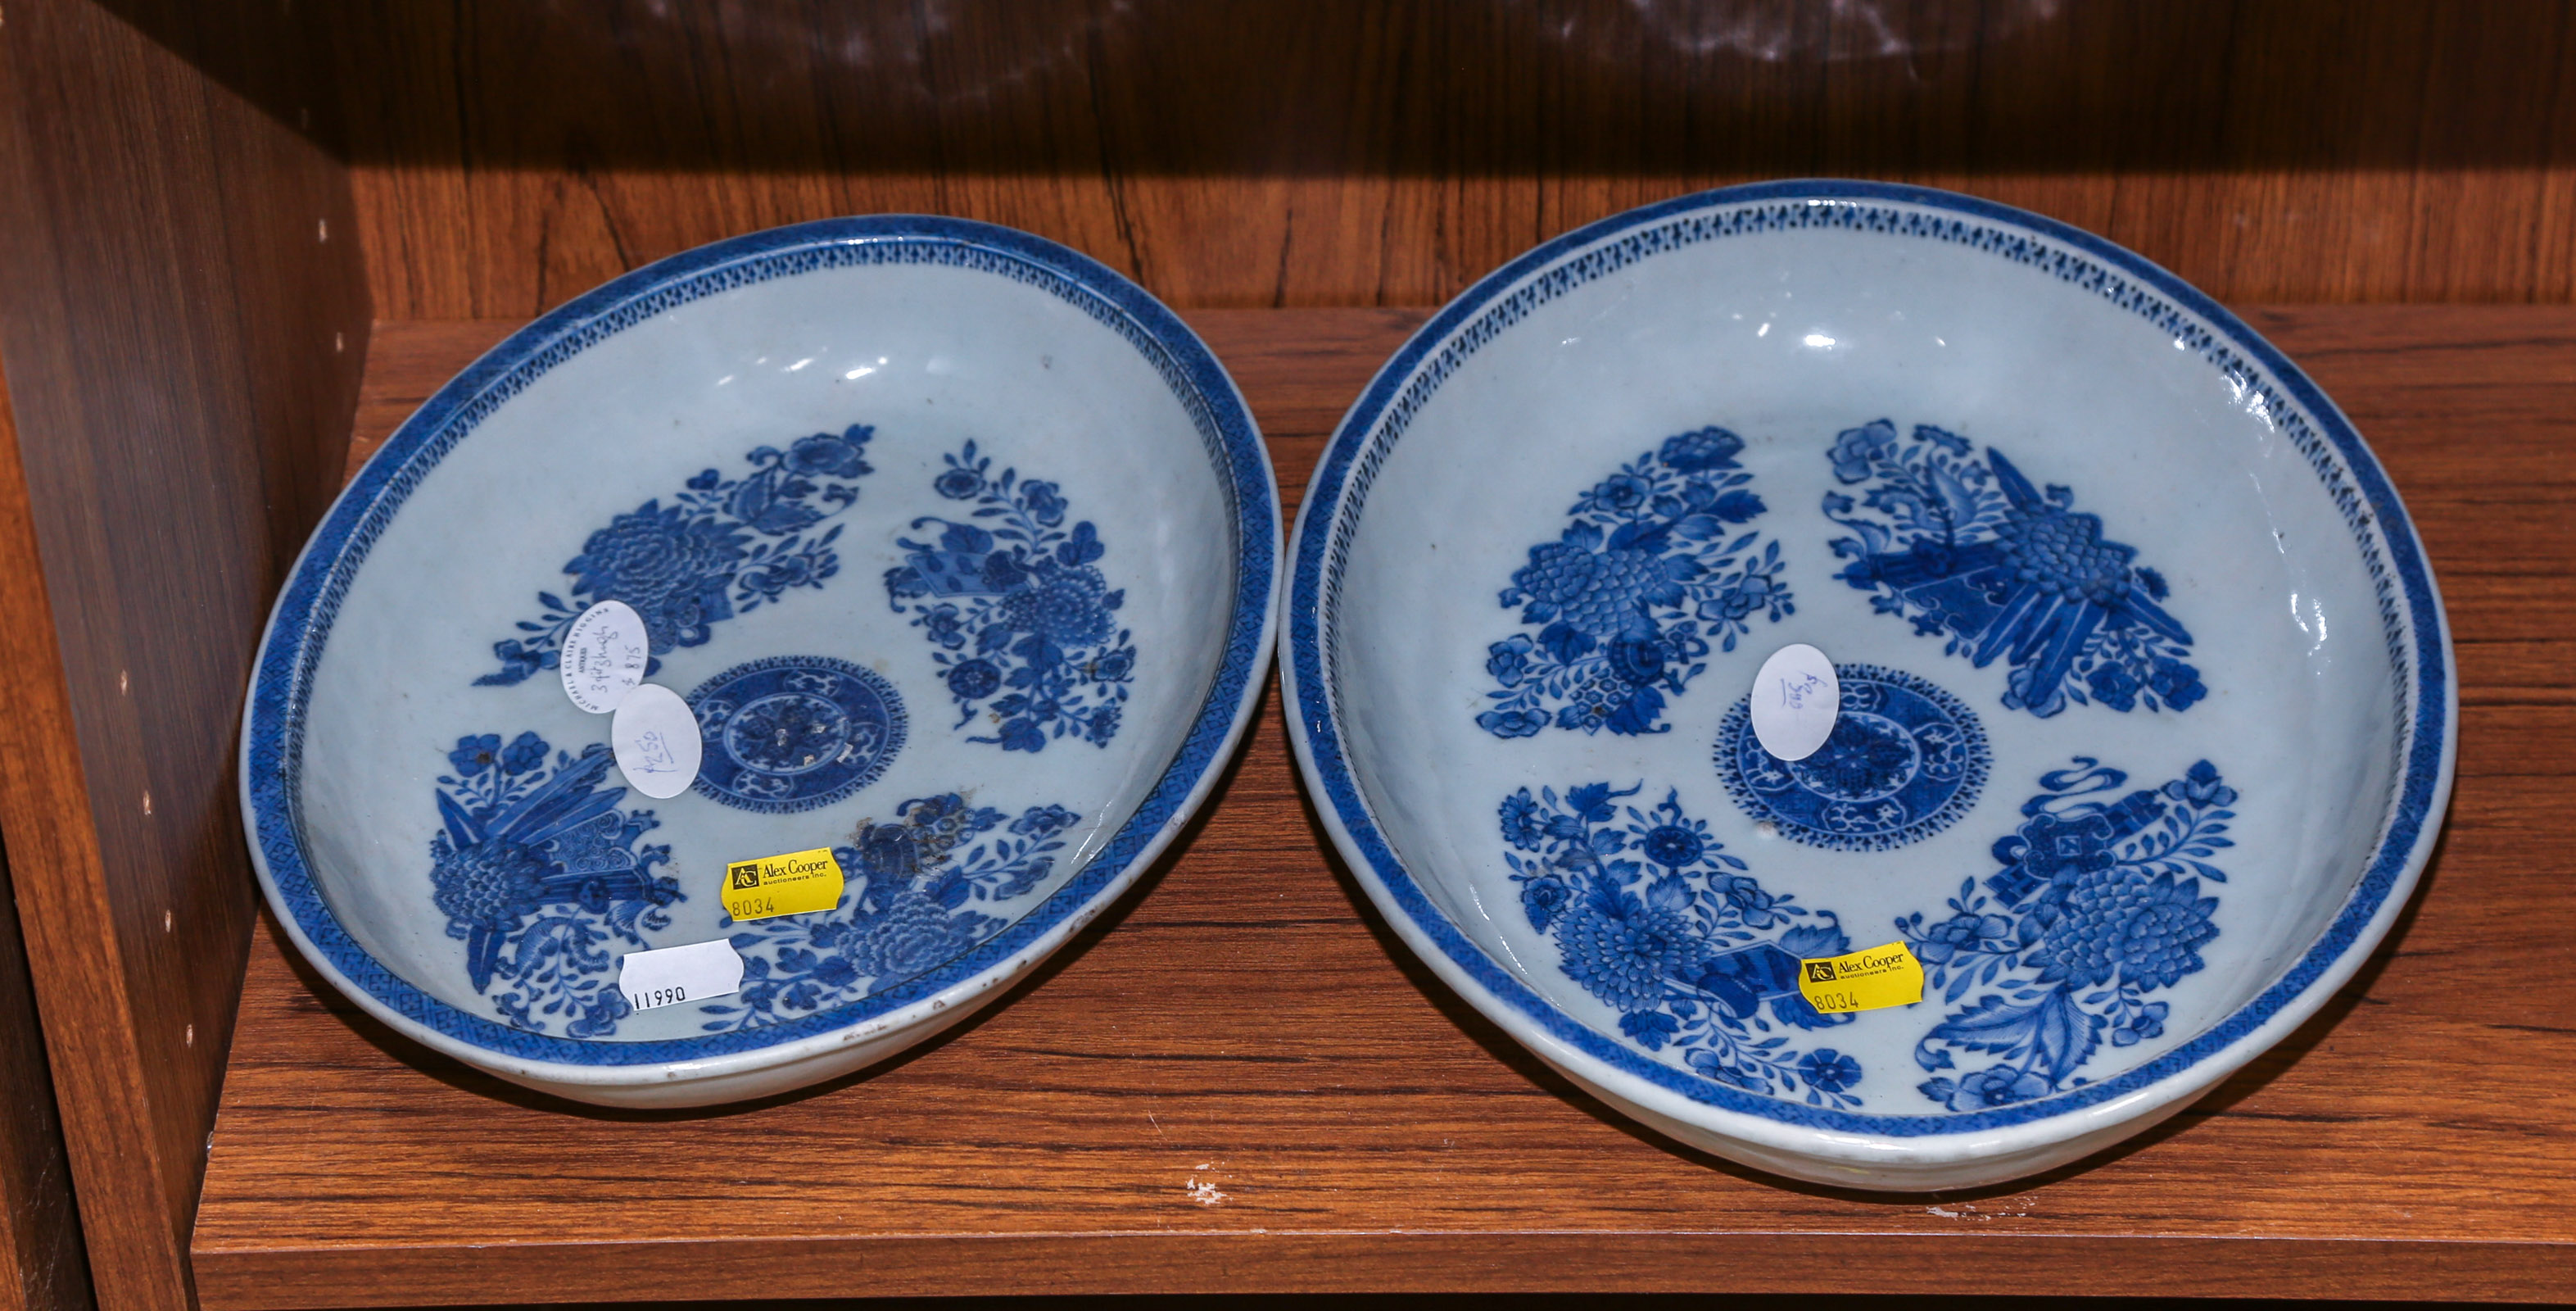 TWO CHINESE EXPORT FITZHUGH PLATTERS 3cb20a